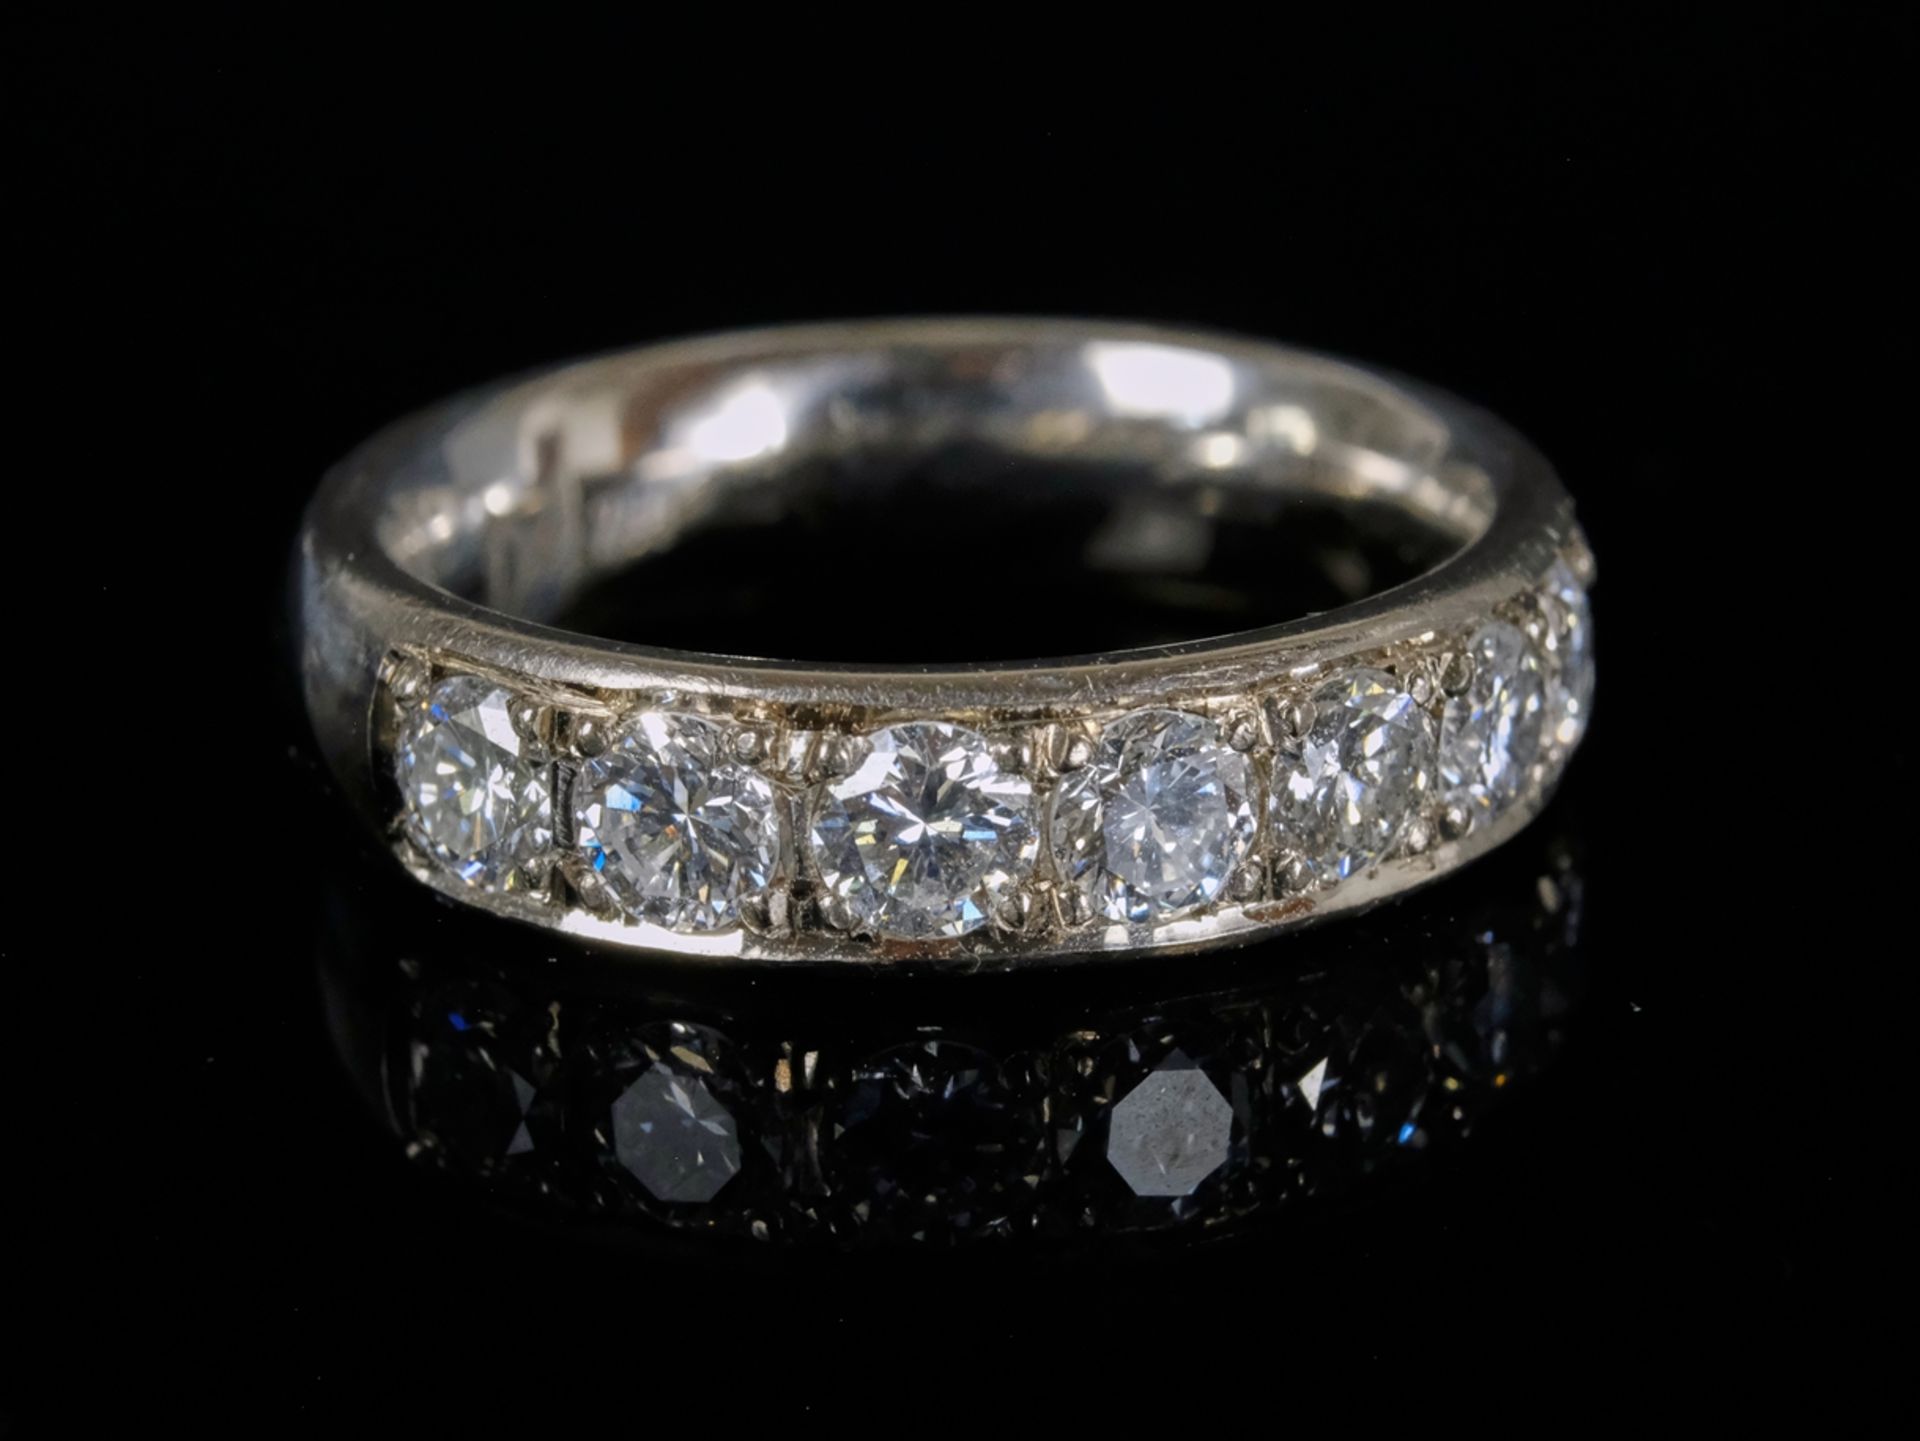 BRILLANT MEMORY RING set with eight brilliant-cut diamonds in a studded setting, MEISTER Manufaktur - Image 3 of 4